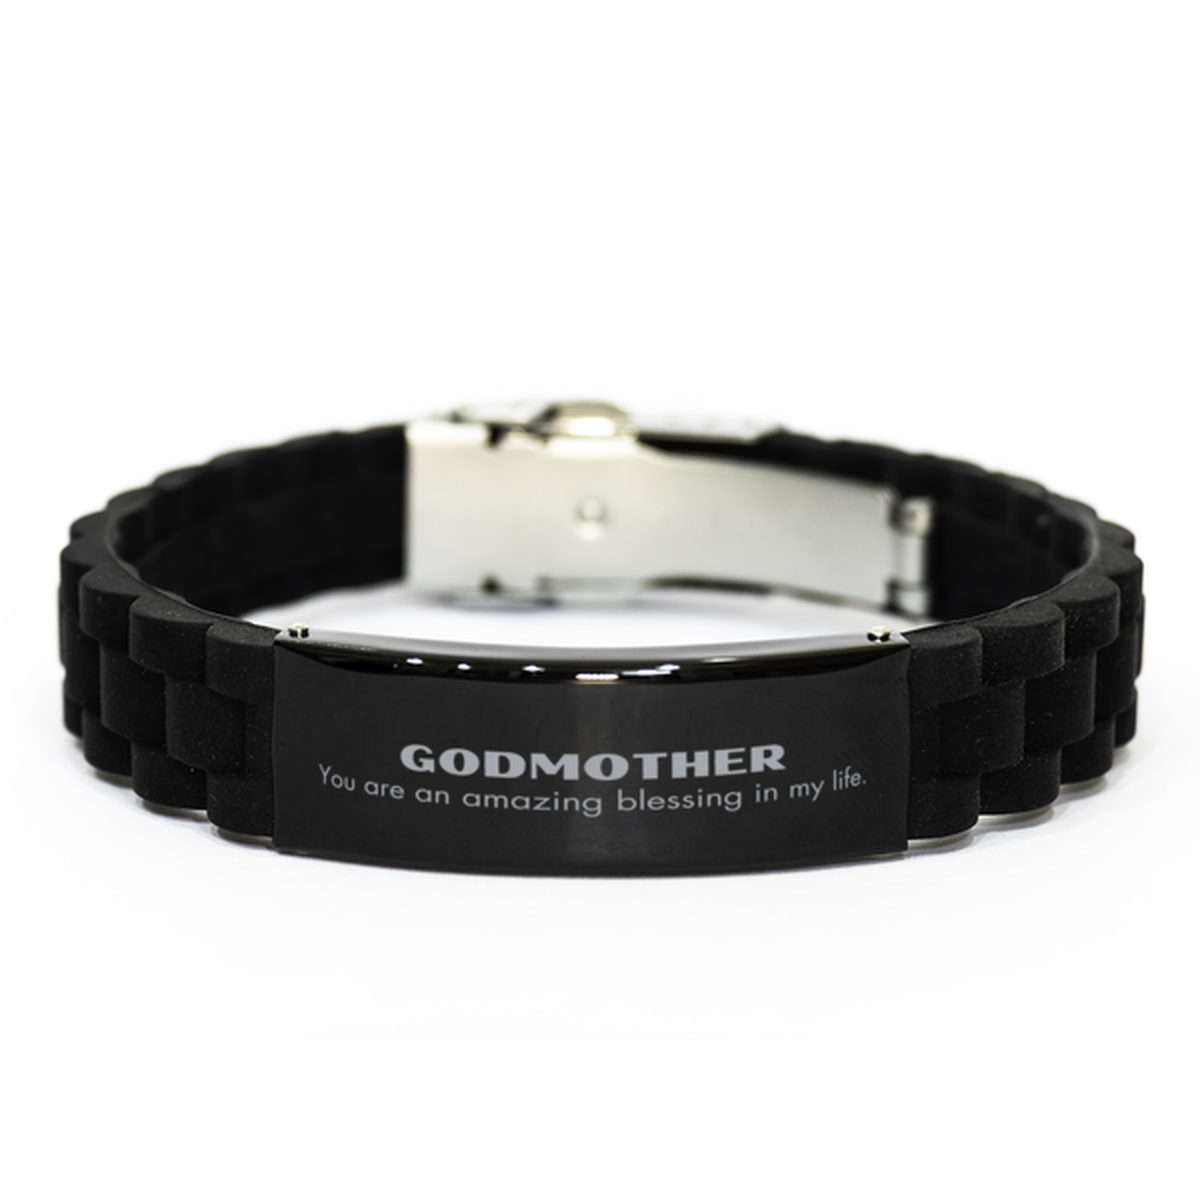 Godmother Black Glidelock Clasp Bracelet, You are an amazing blessing in my life, Thank You Gifts For Godmother, Inspirational Birthday Christmas Unique Gifts For Godmother